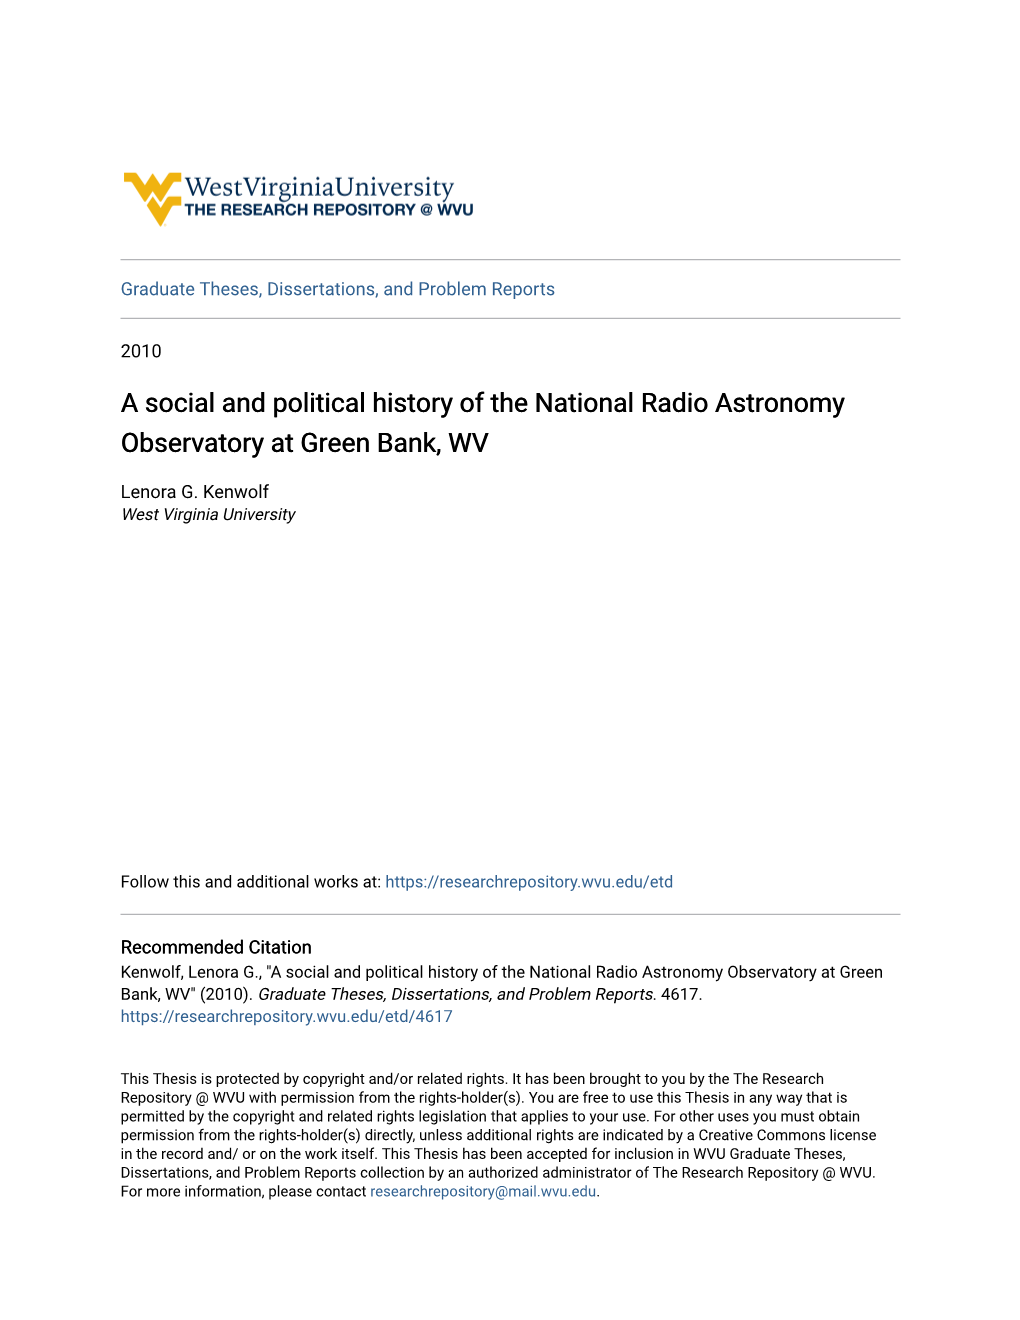 A Social and Political History of the National Radio Astronomy Observatory at Green Bank, WV